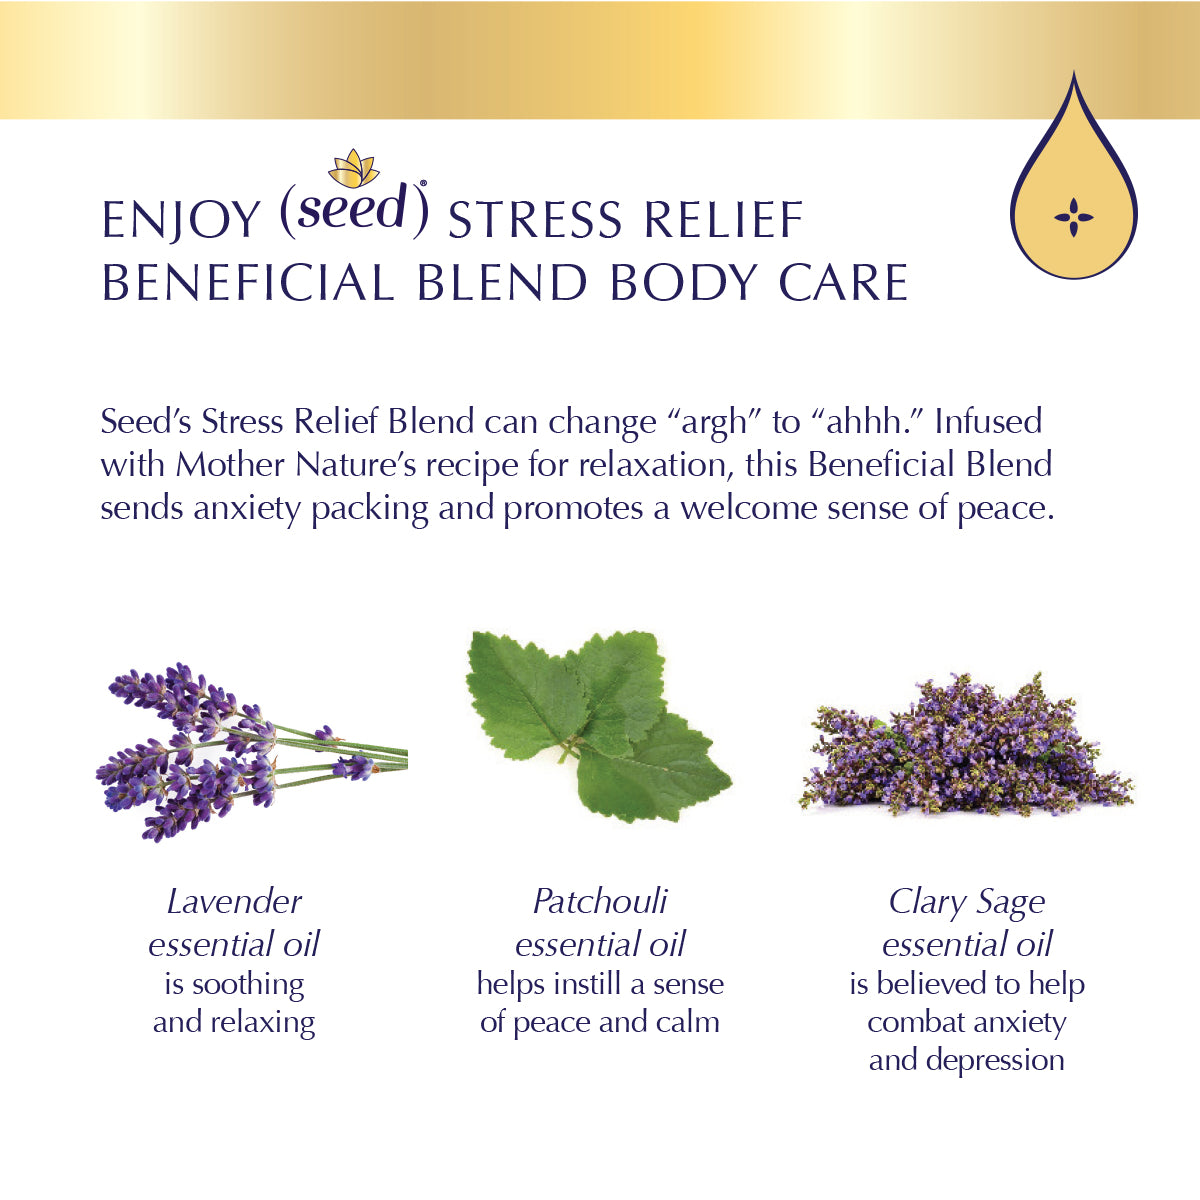 Seed Stress Relief Blend Body Care with lavender, patchouli, and clary sage essential oils